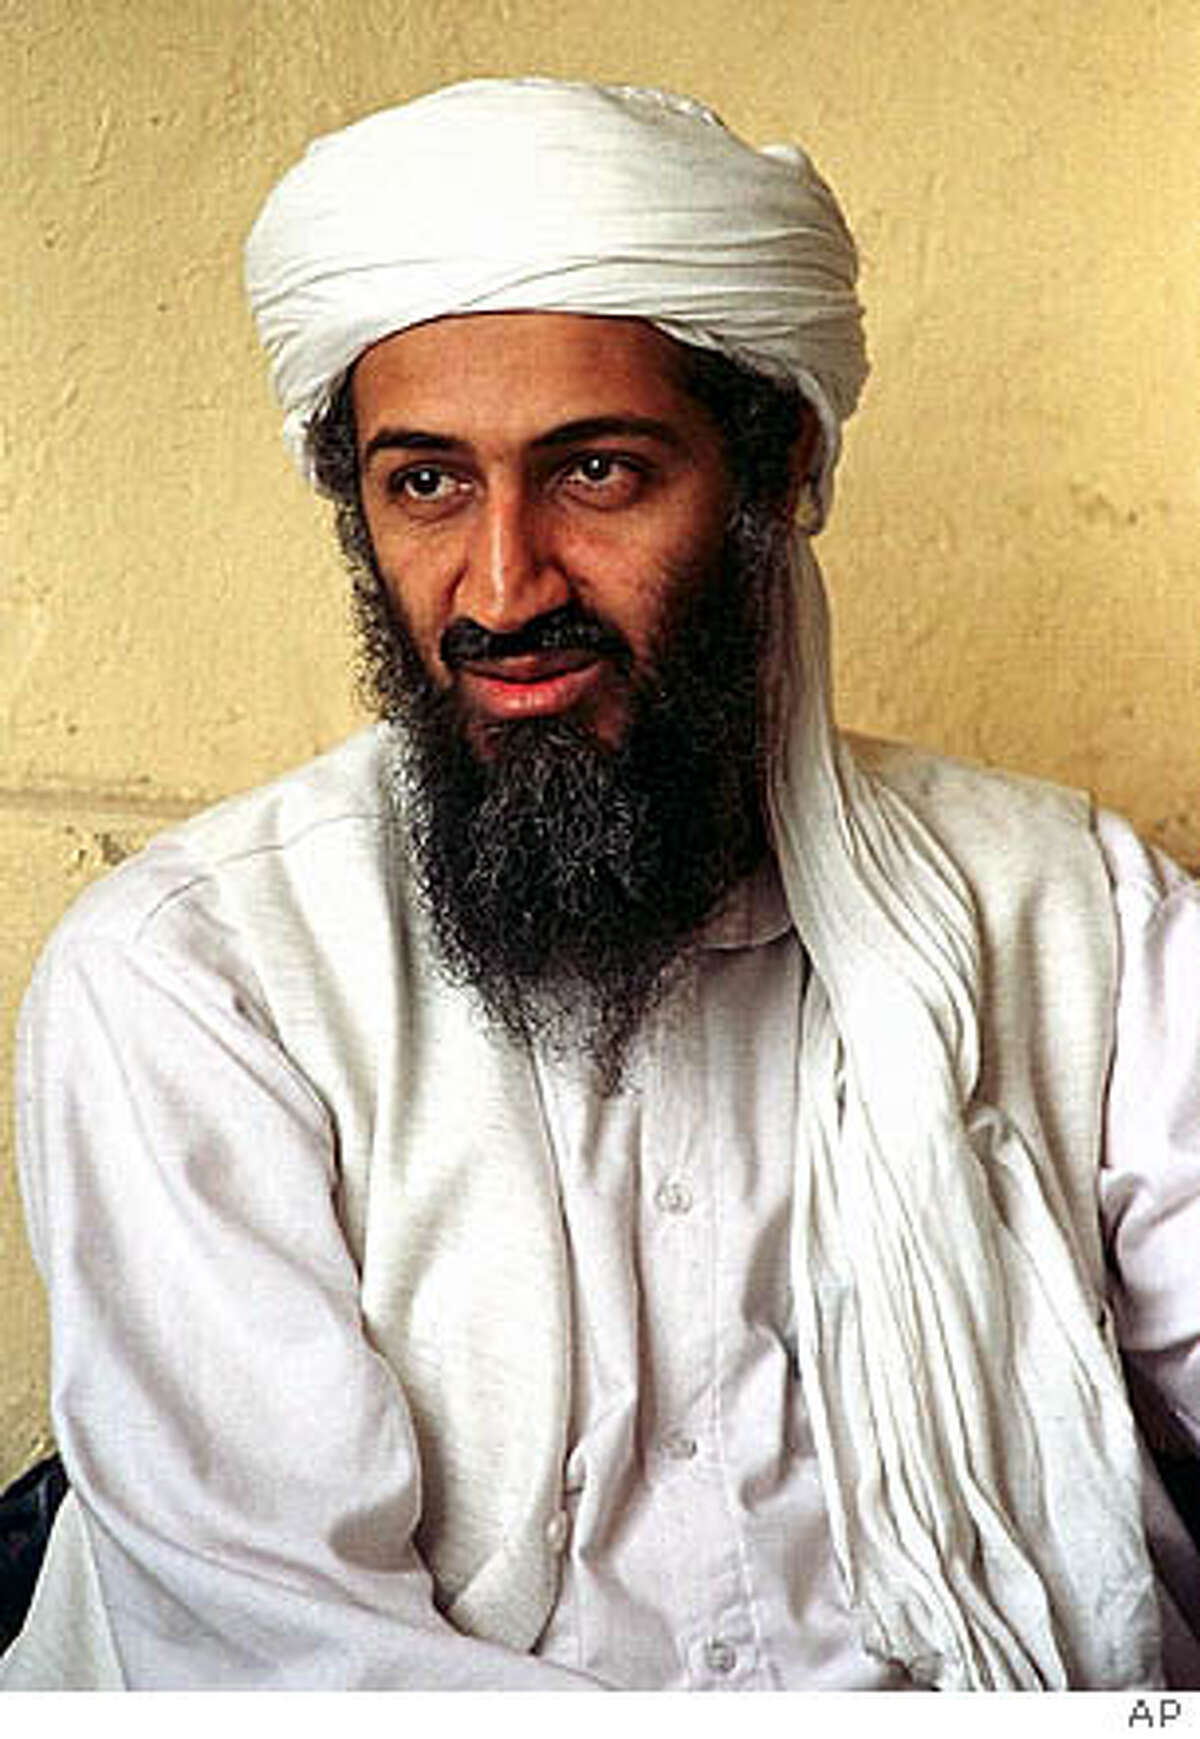 ** CAPTION CORRECTION, CORRECTS TITLE TO AL-QAIDA LEADER, NOT EXILED SAUDI DISSIDENT ** FILE ** Al-Qaida leader Osama bin Laden is seen in this April 1998 file photo in Afghanistan. Al-Jazeera aired an audiotape purportedly from Osama bin Laden on Thursday, Jan. 19, 2006, saying al-Qaida is making preparations for attacks in the United States but offering a truce to rebuild Iraq and Afghanistan. (AP Photo) Ran on: 01-20-2006 Ran on: 01-20-2006 Ran on: 01-20-2006 APRIL 1998 FILE PHOTO